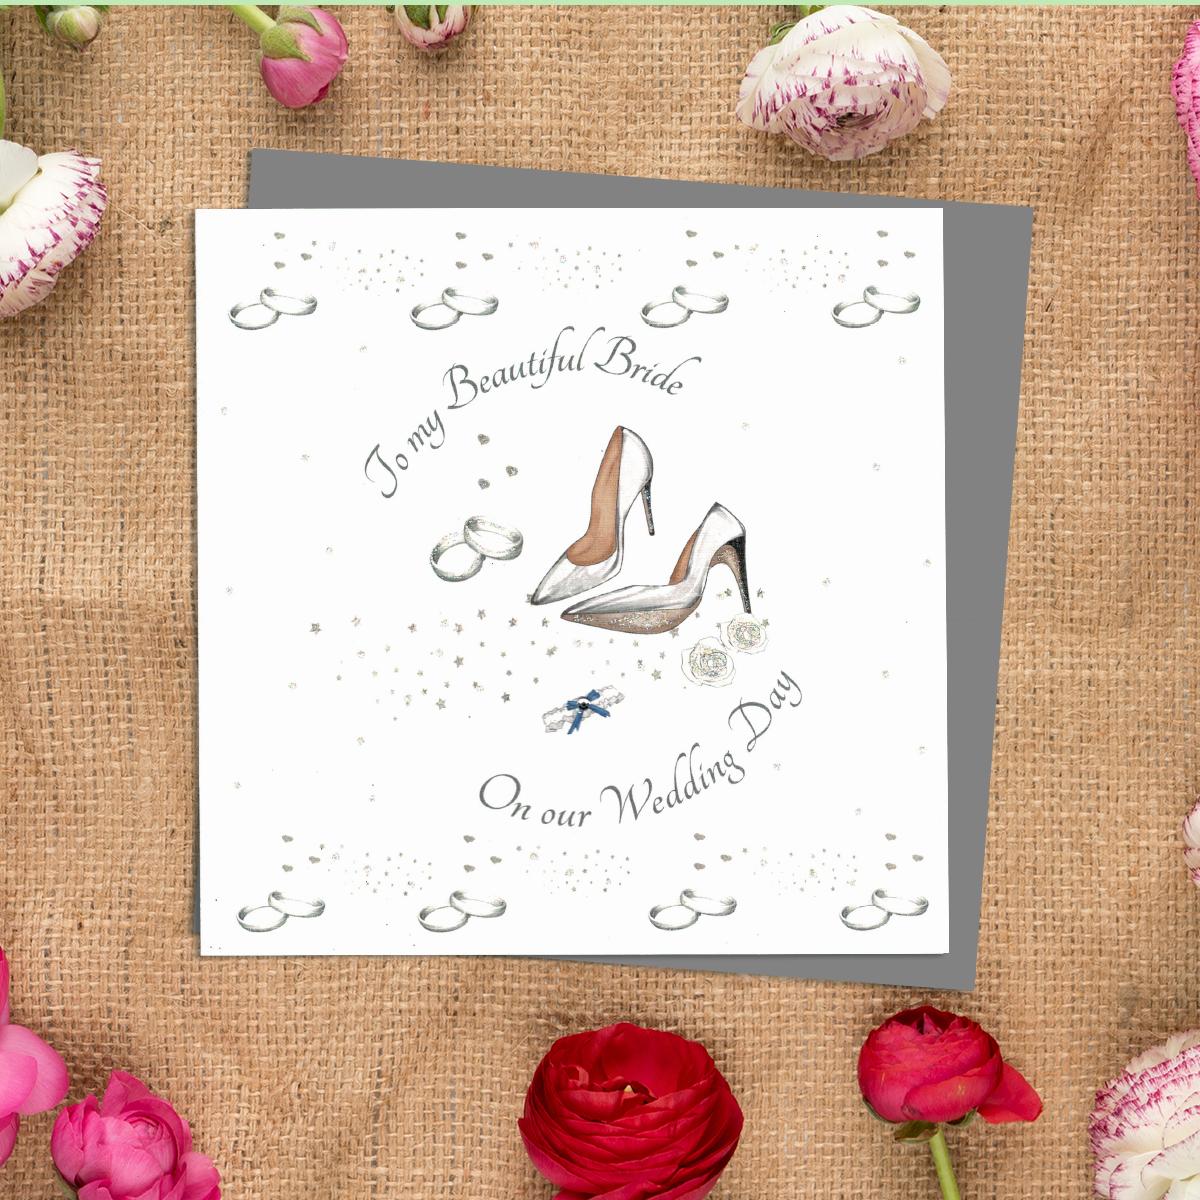 Wife Wedding Day Cards Image